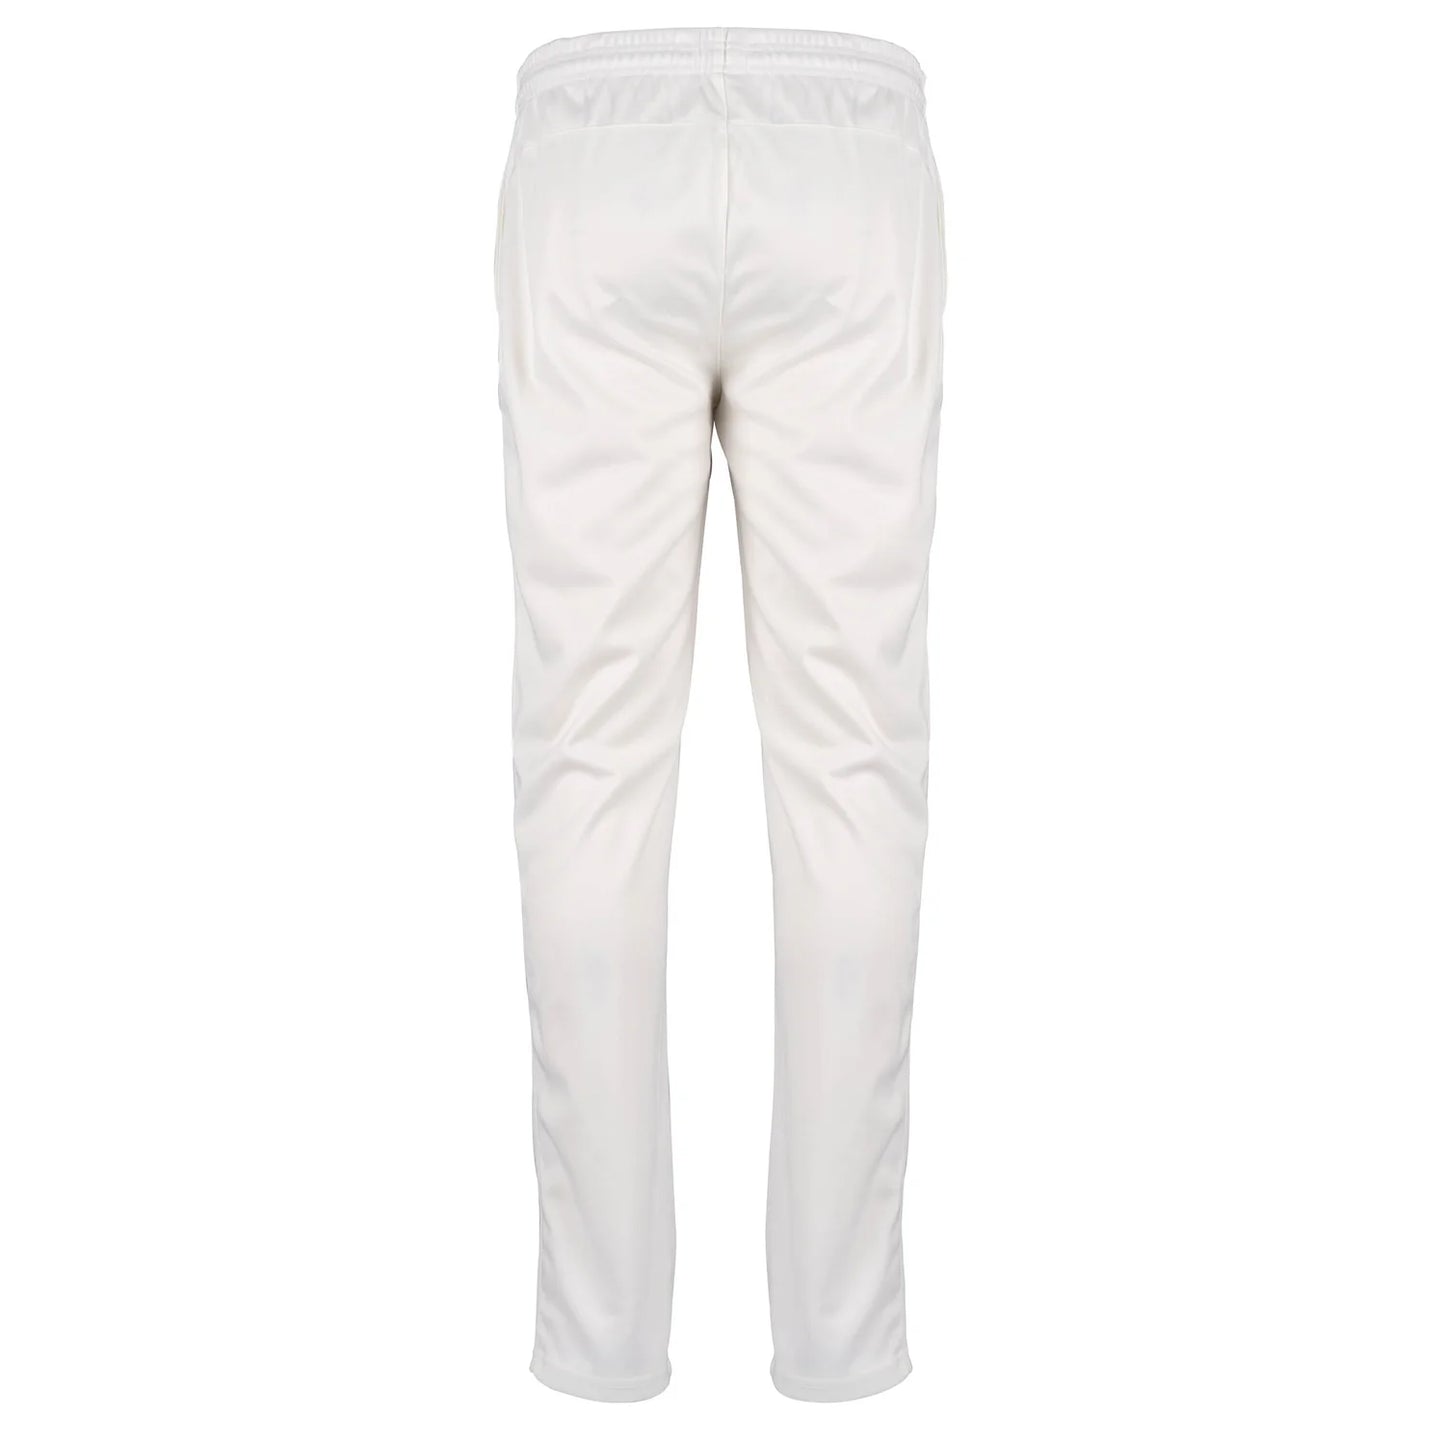 Hawarden Park Match Trousers - Queensferry Sports